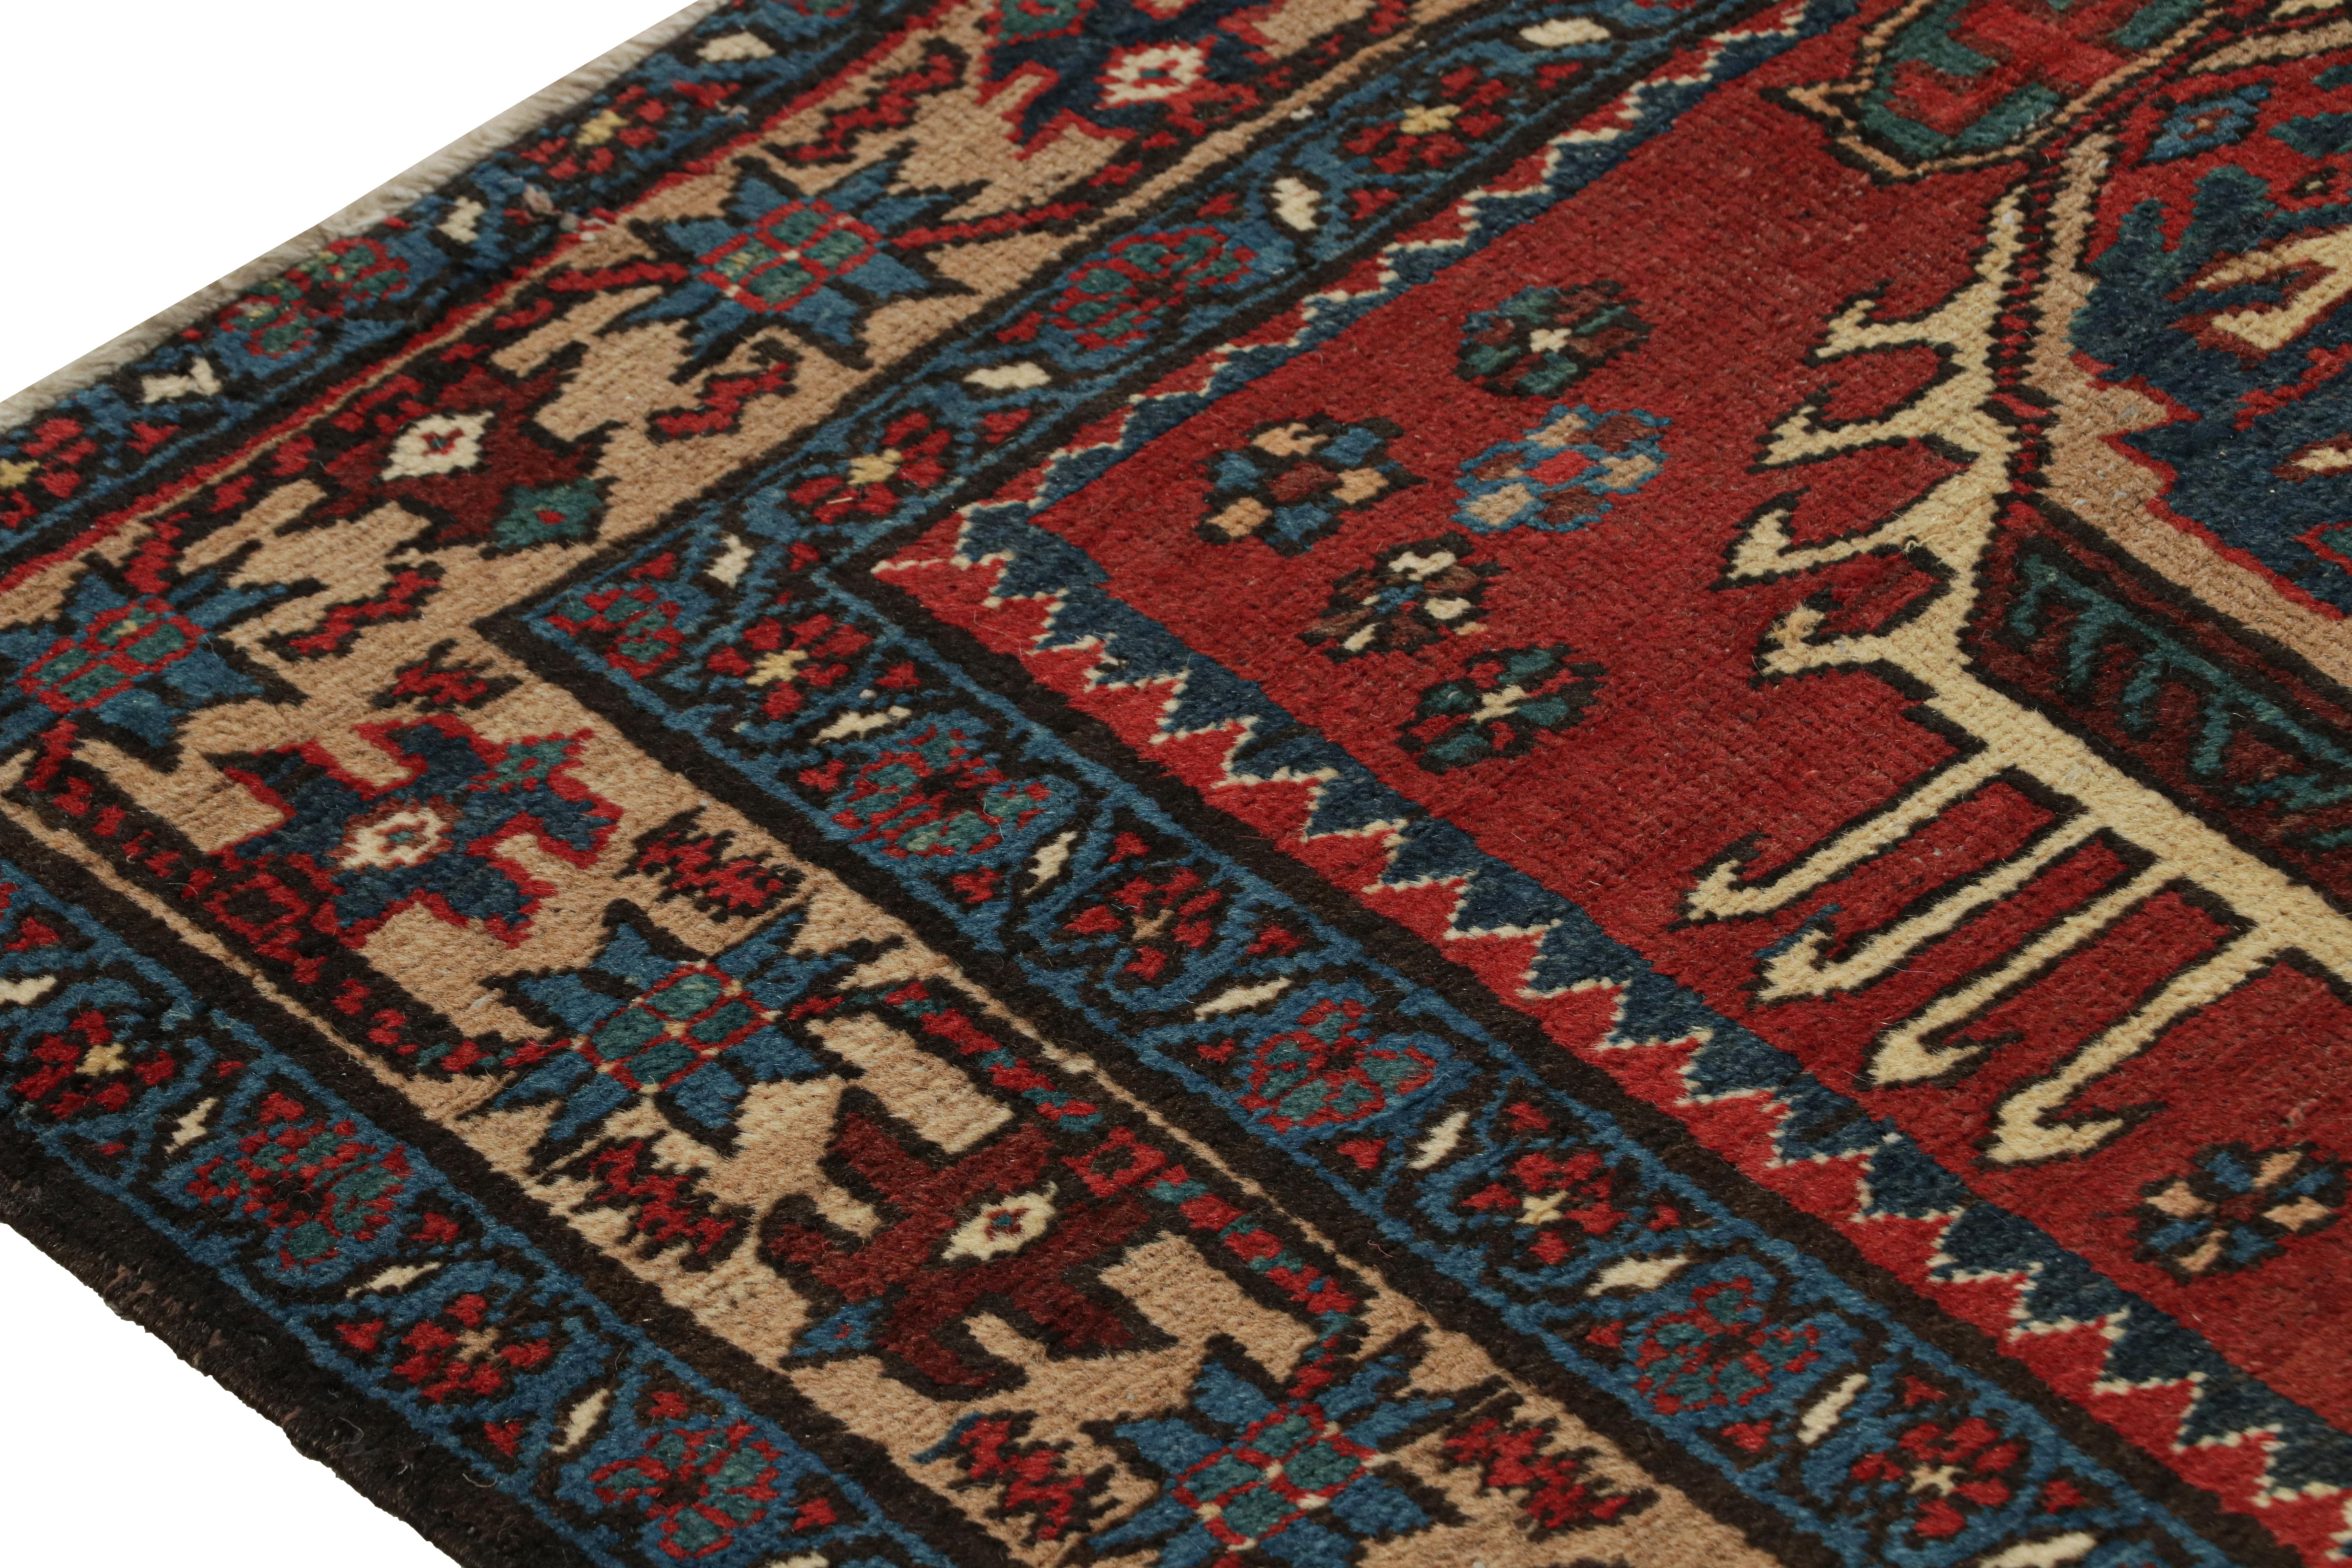 Early 20th Century Antique Arraiolos Needlepoint Runner with Floral Medallions, from Rug & Kilim For Sale